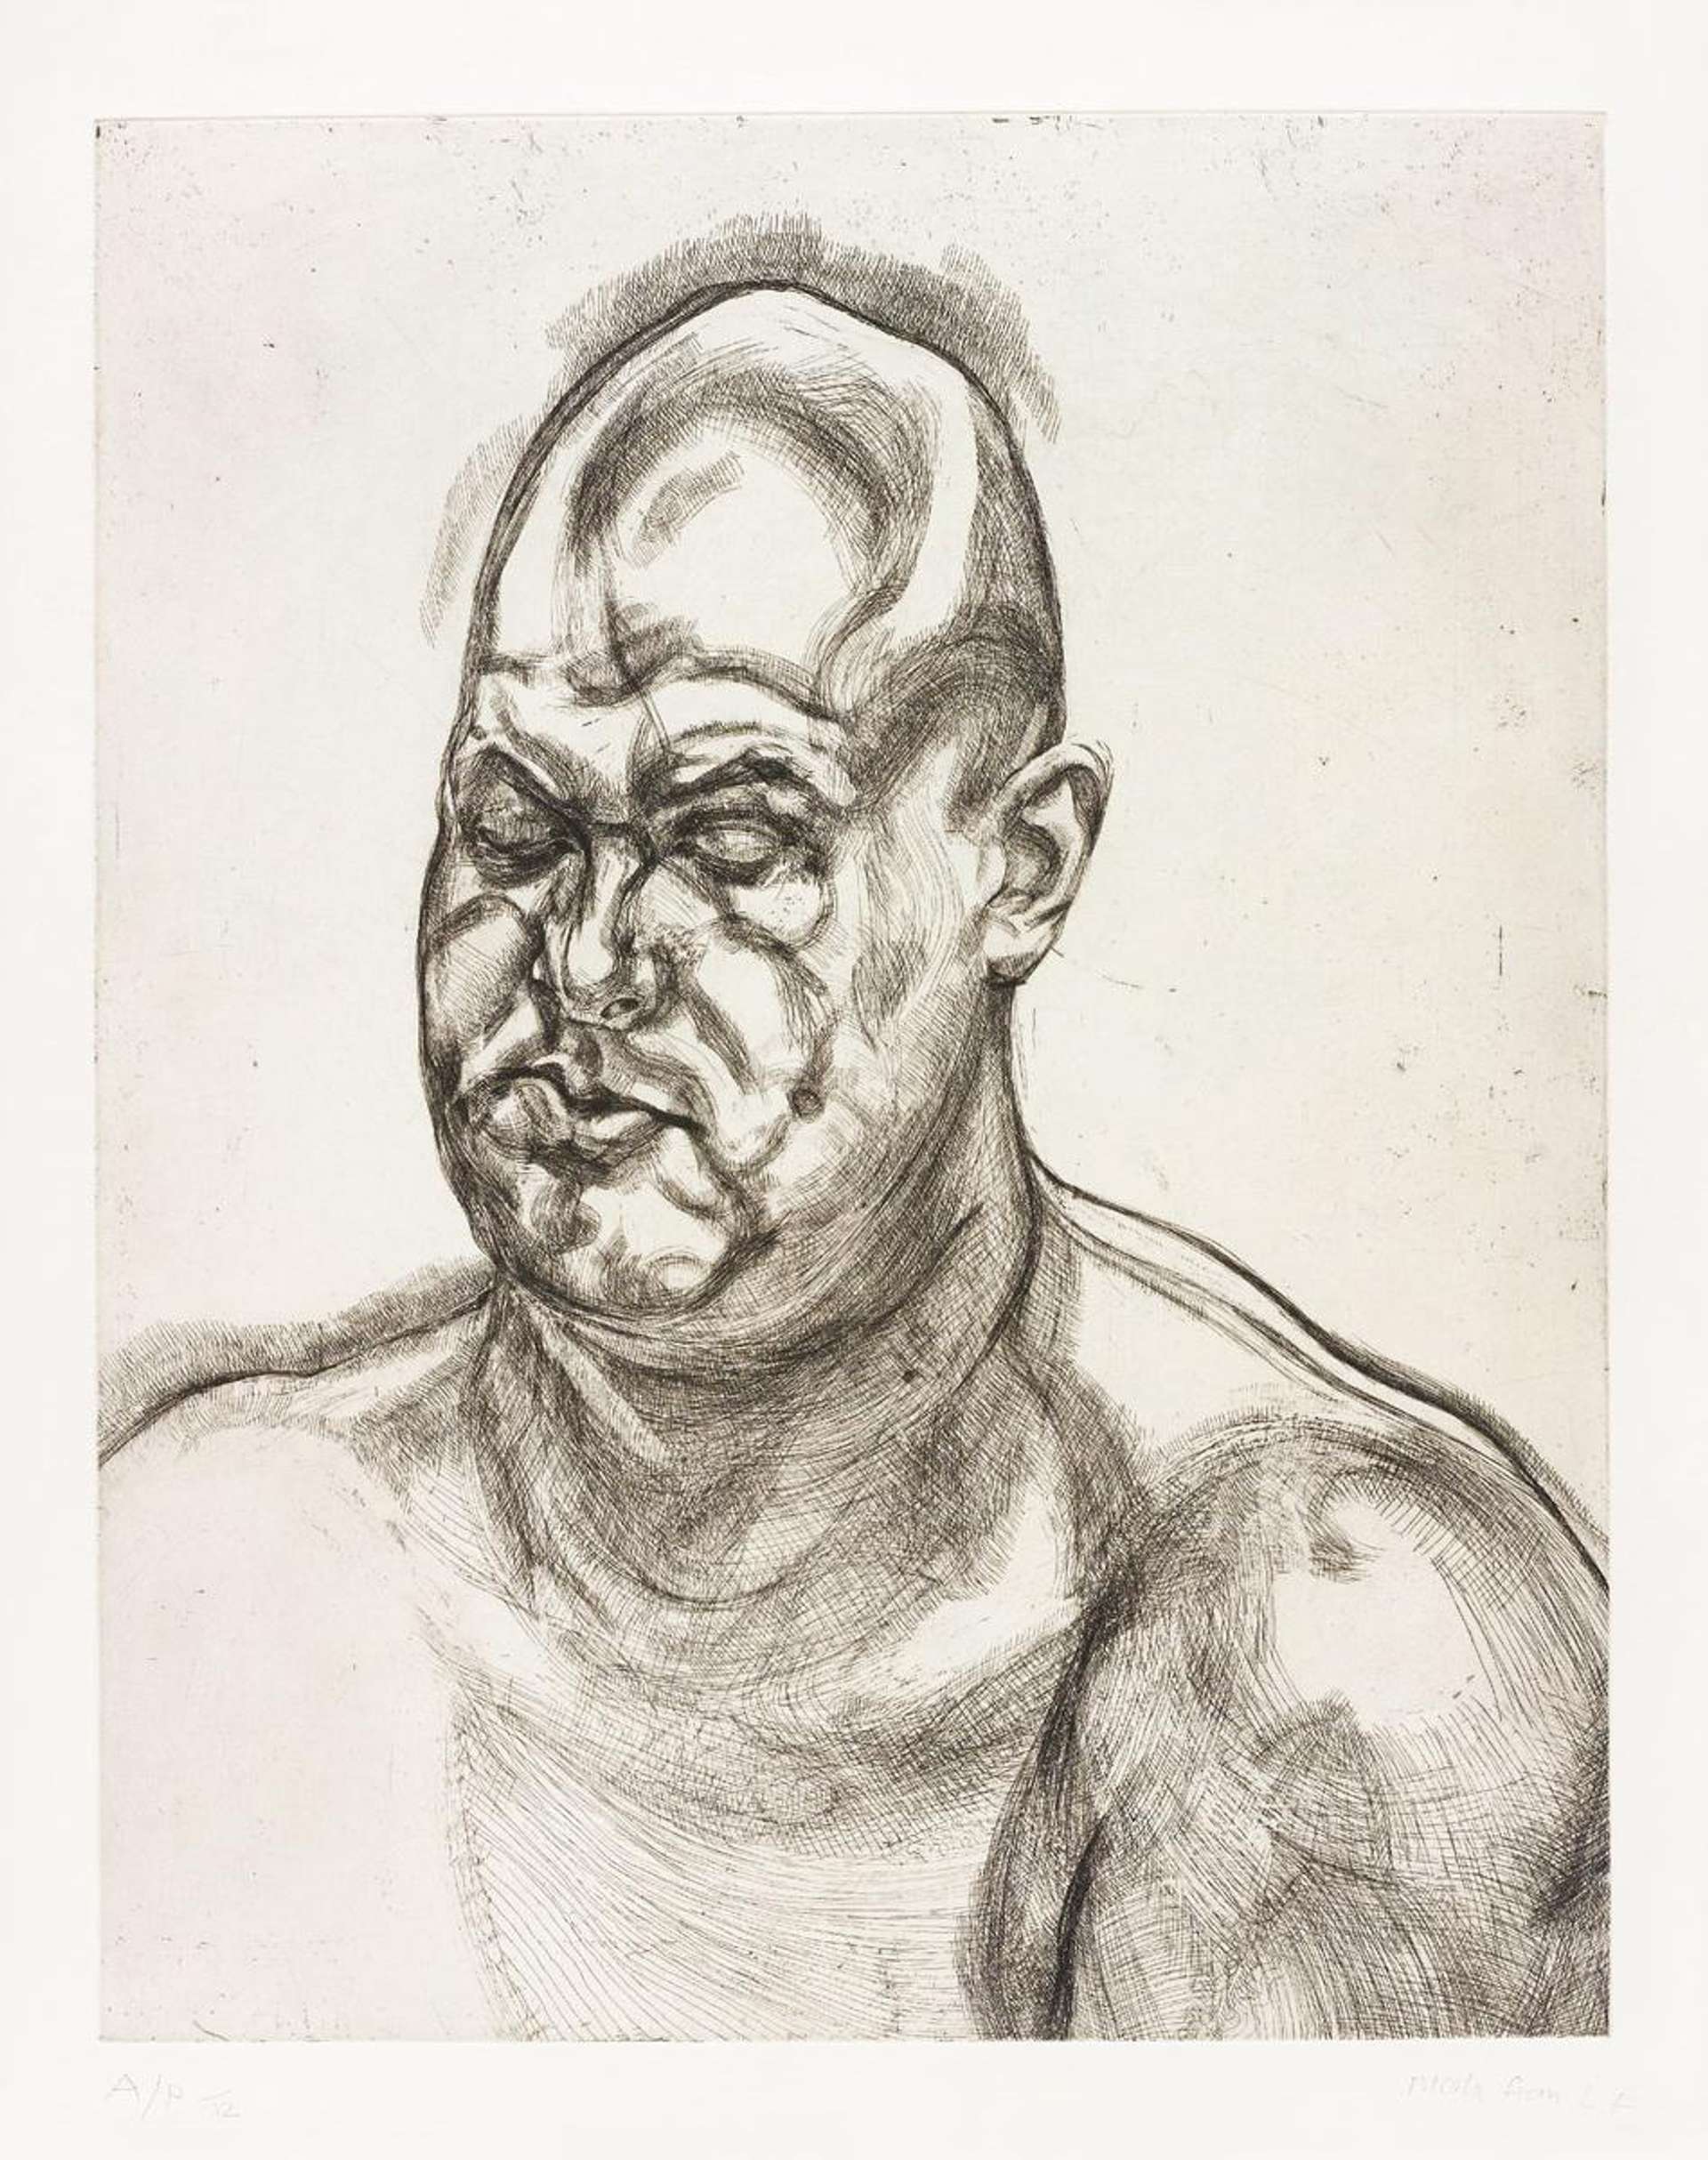 An image of the print Large Head by Lucian Freud. It shows a bald shirtless man, modelled after Leigh Bowery. The work is done in monochrome.